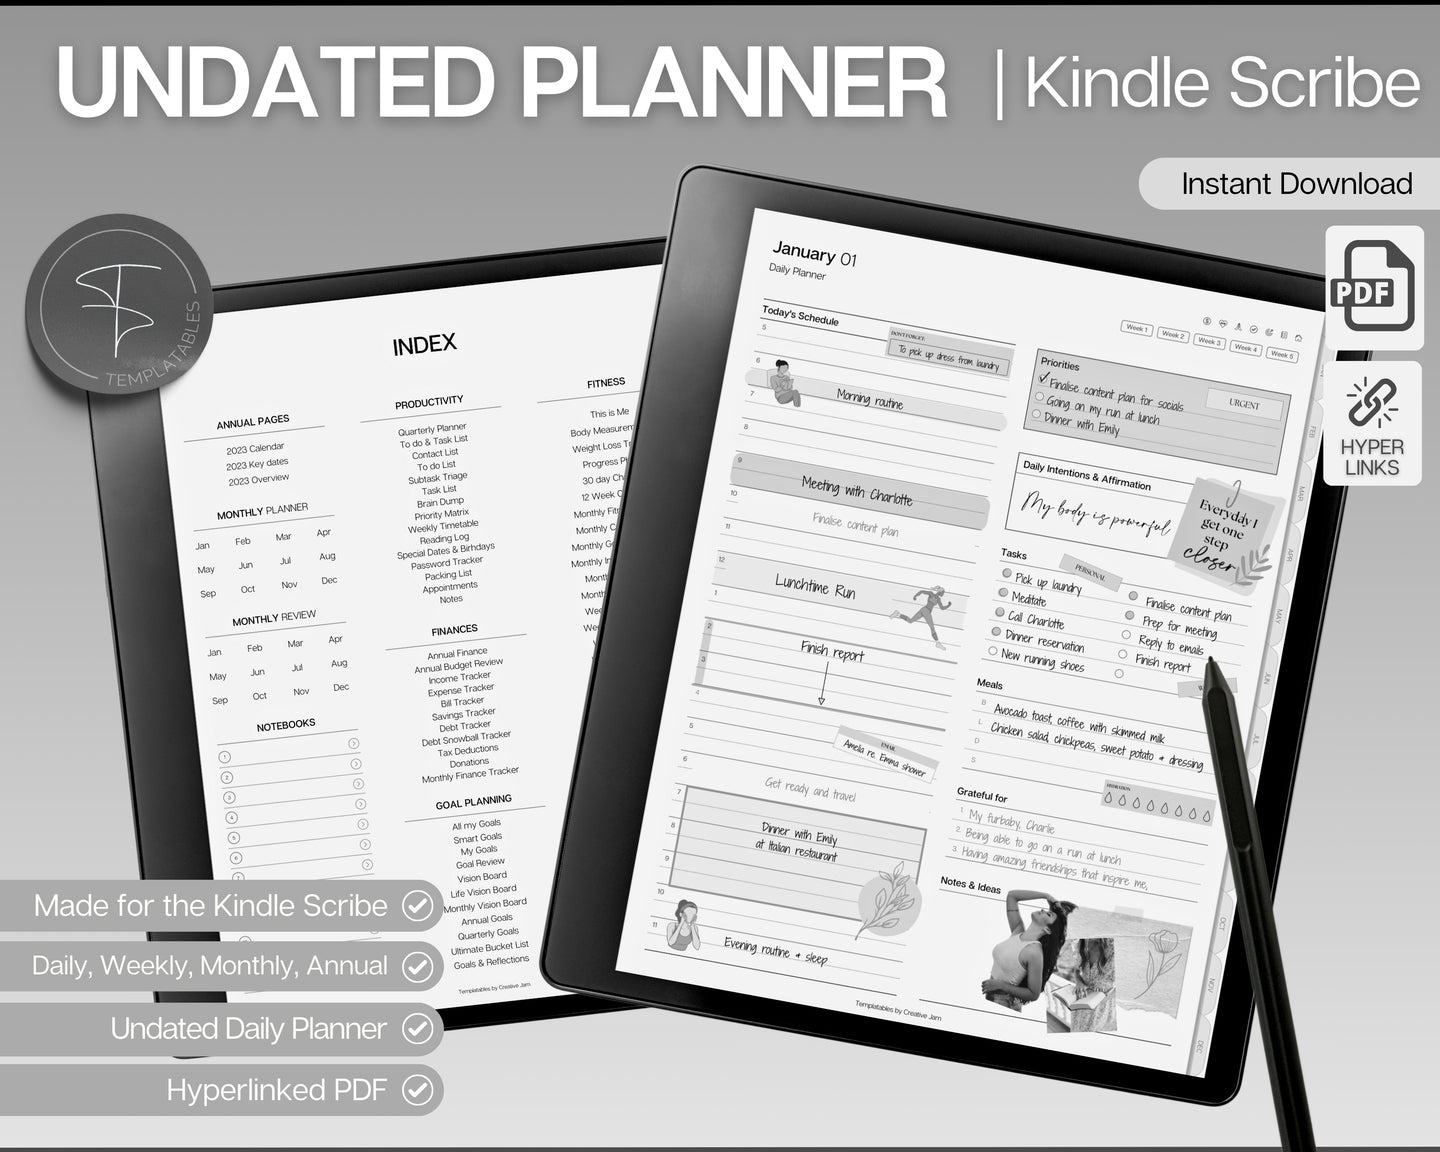 Kindle Scribe UNDATED Daily Planner | Includes Kindle Scribe templates, Weekly & Monthly Planner, Undated Planner, Kindle Planner & Digital Journal